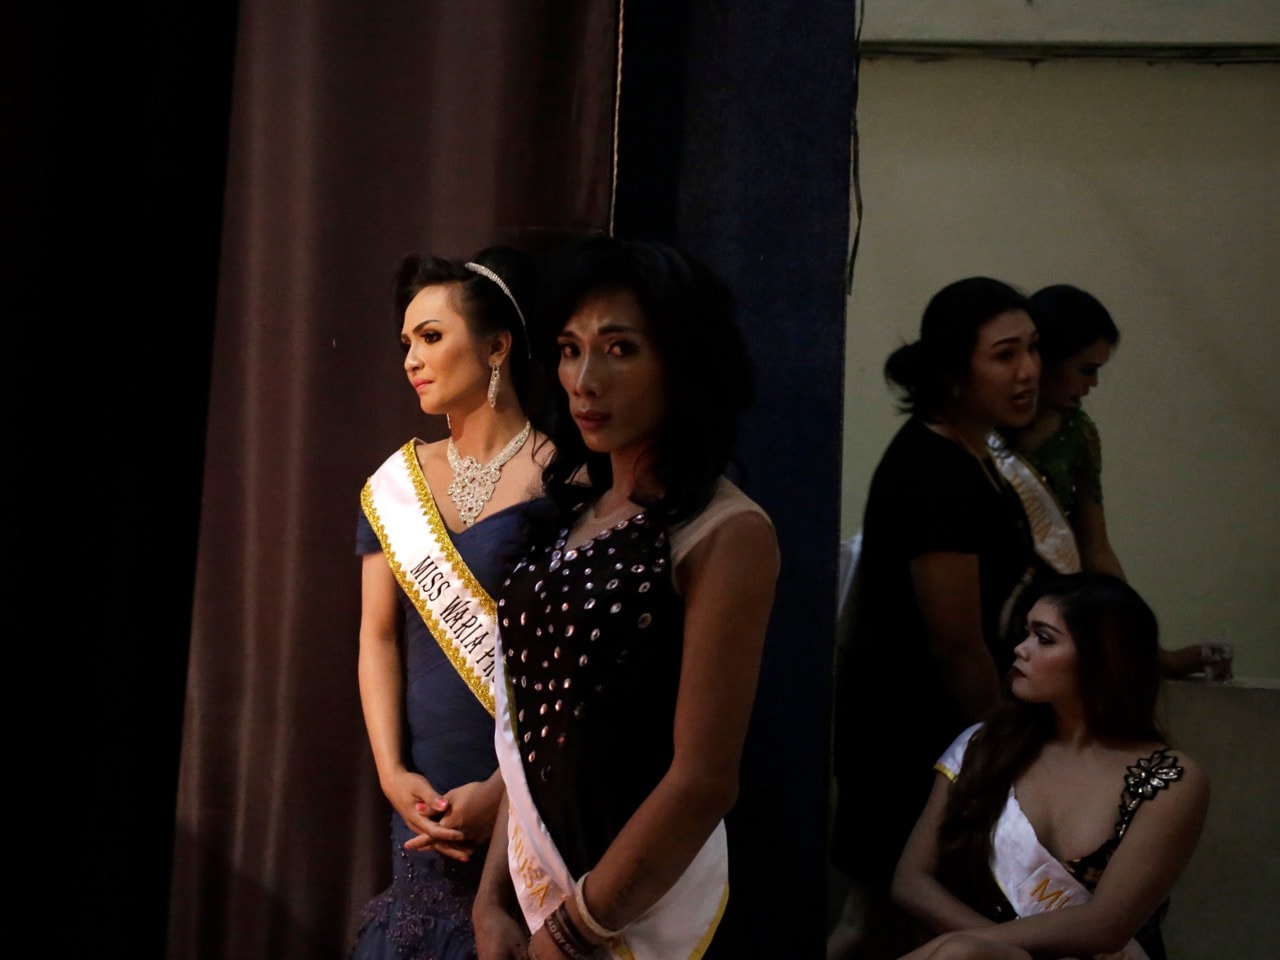 On 11 November 2016, contestants wait backstage during the Miss Transgender Indonesia pageant in Jakarta. Opposition from Islamic hardliner groups prevented the long-running event twice in recent years, AP Photo/Dita Alangkara